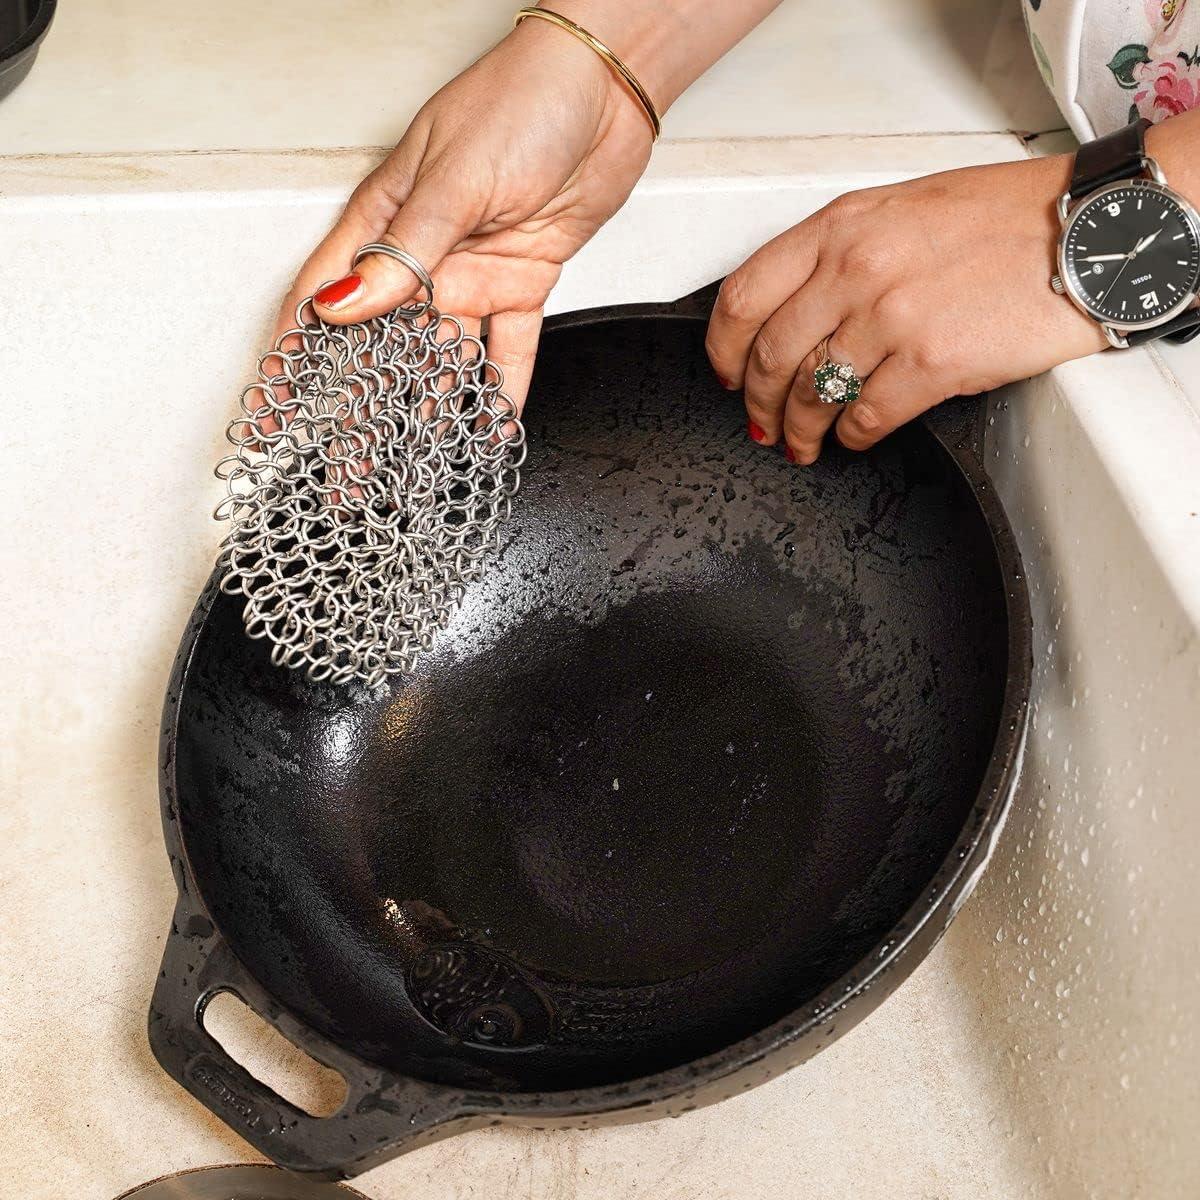 cm Scrubber - Chain Mail Scrubber for Cast Iron Cookware